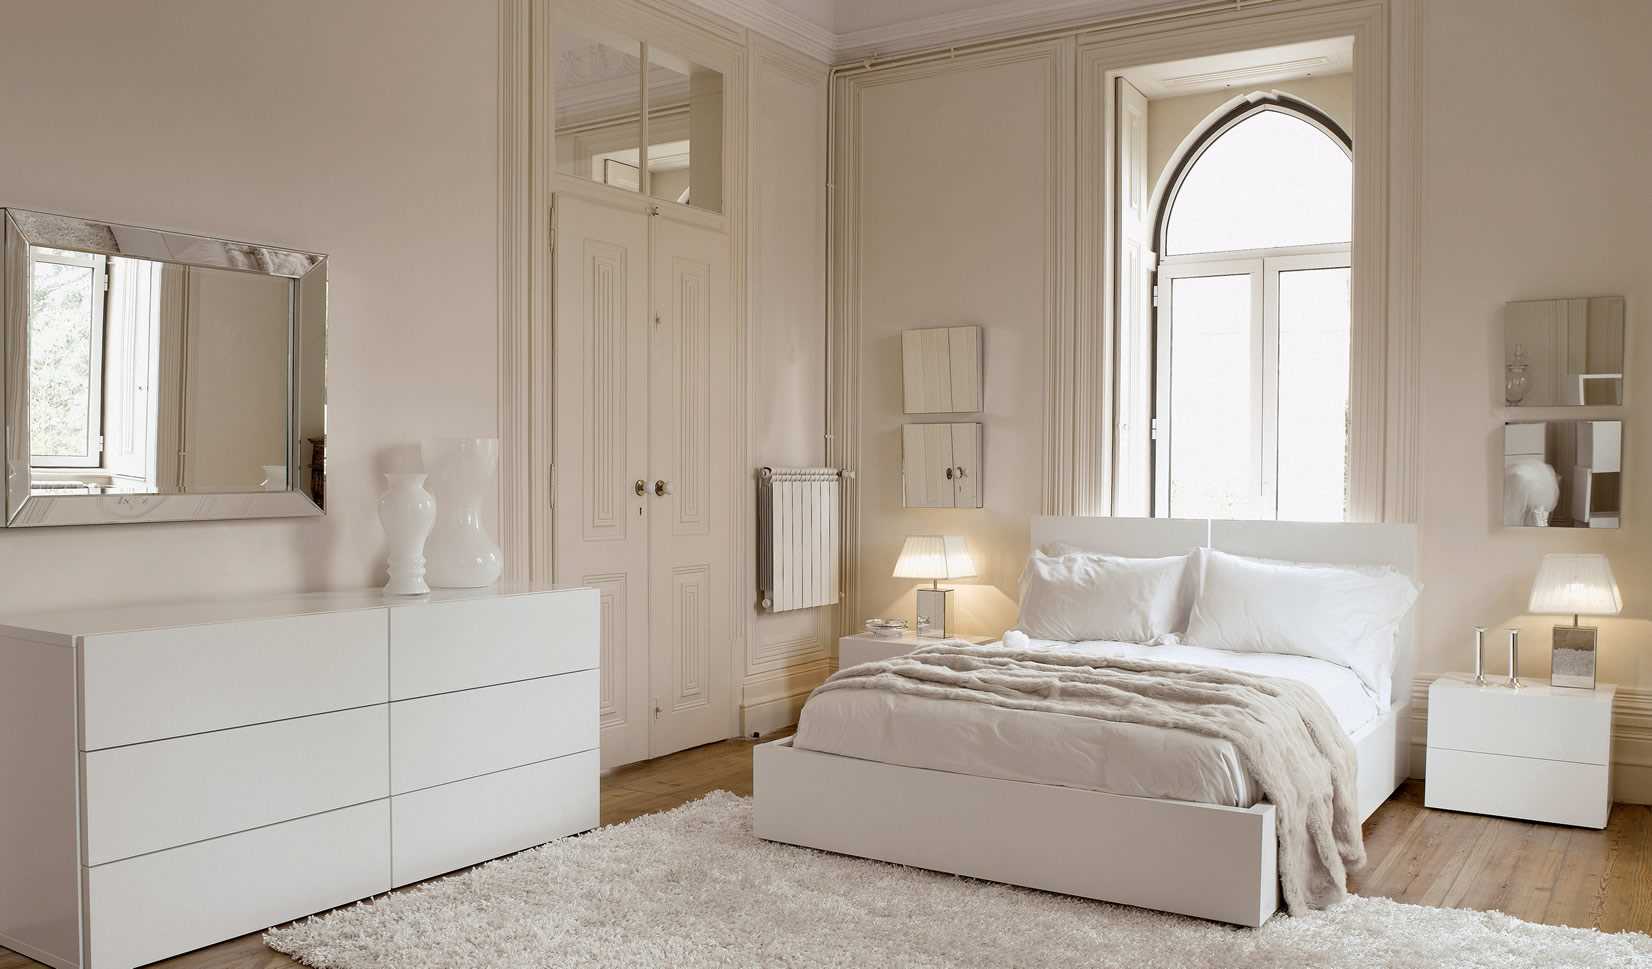 a variant of a beautiful bedroom interior in white